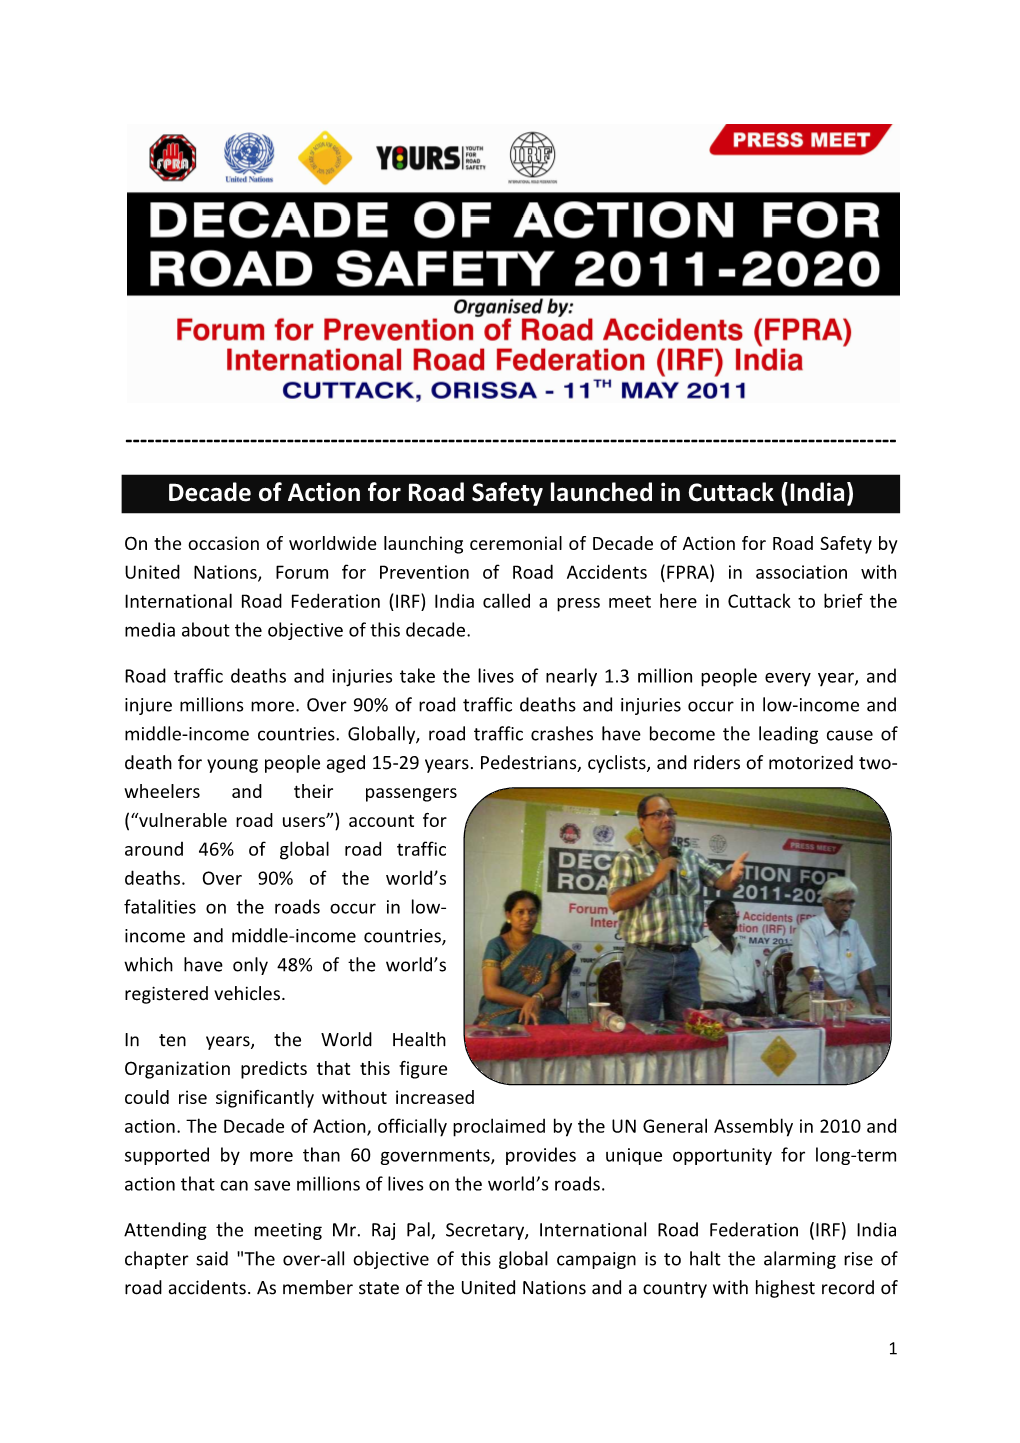 Decade of Action for Road Safety Launched in Cuttack (India)